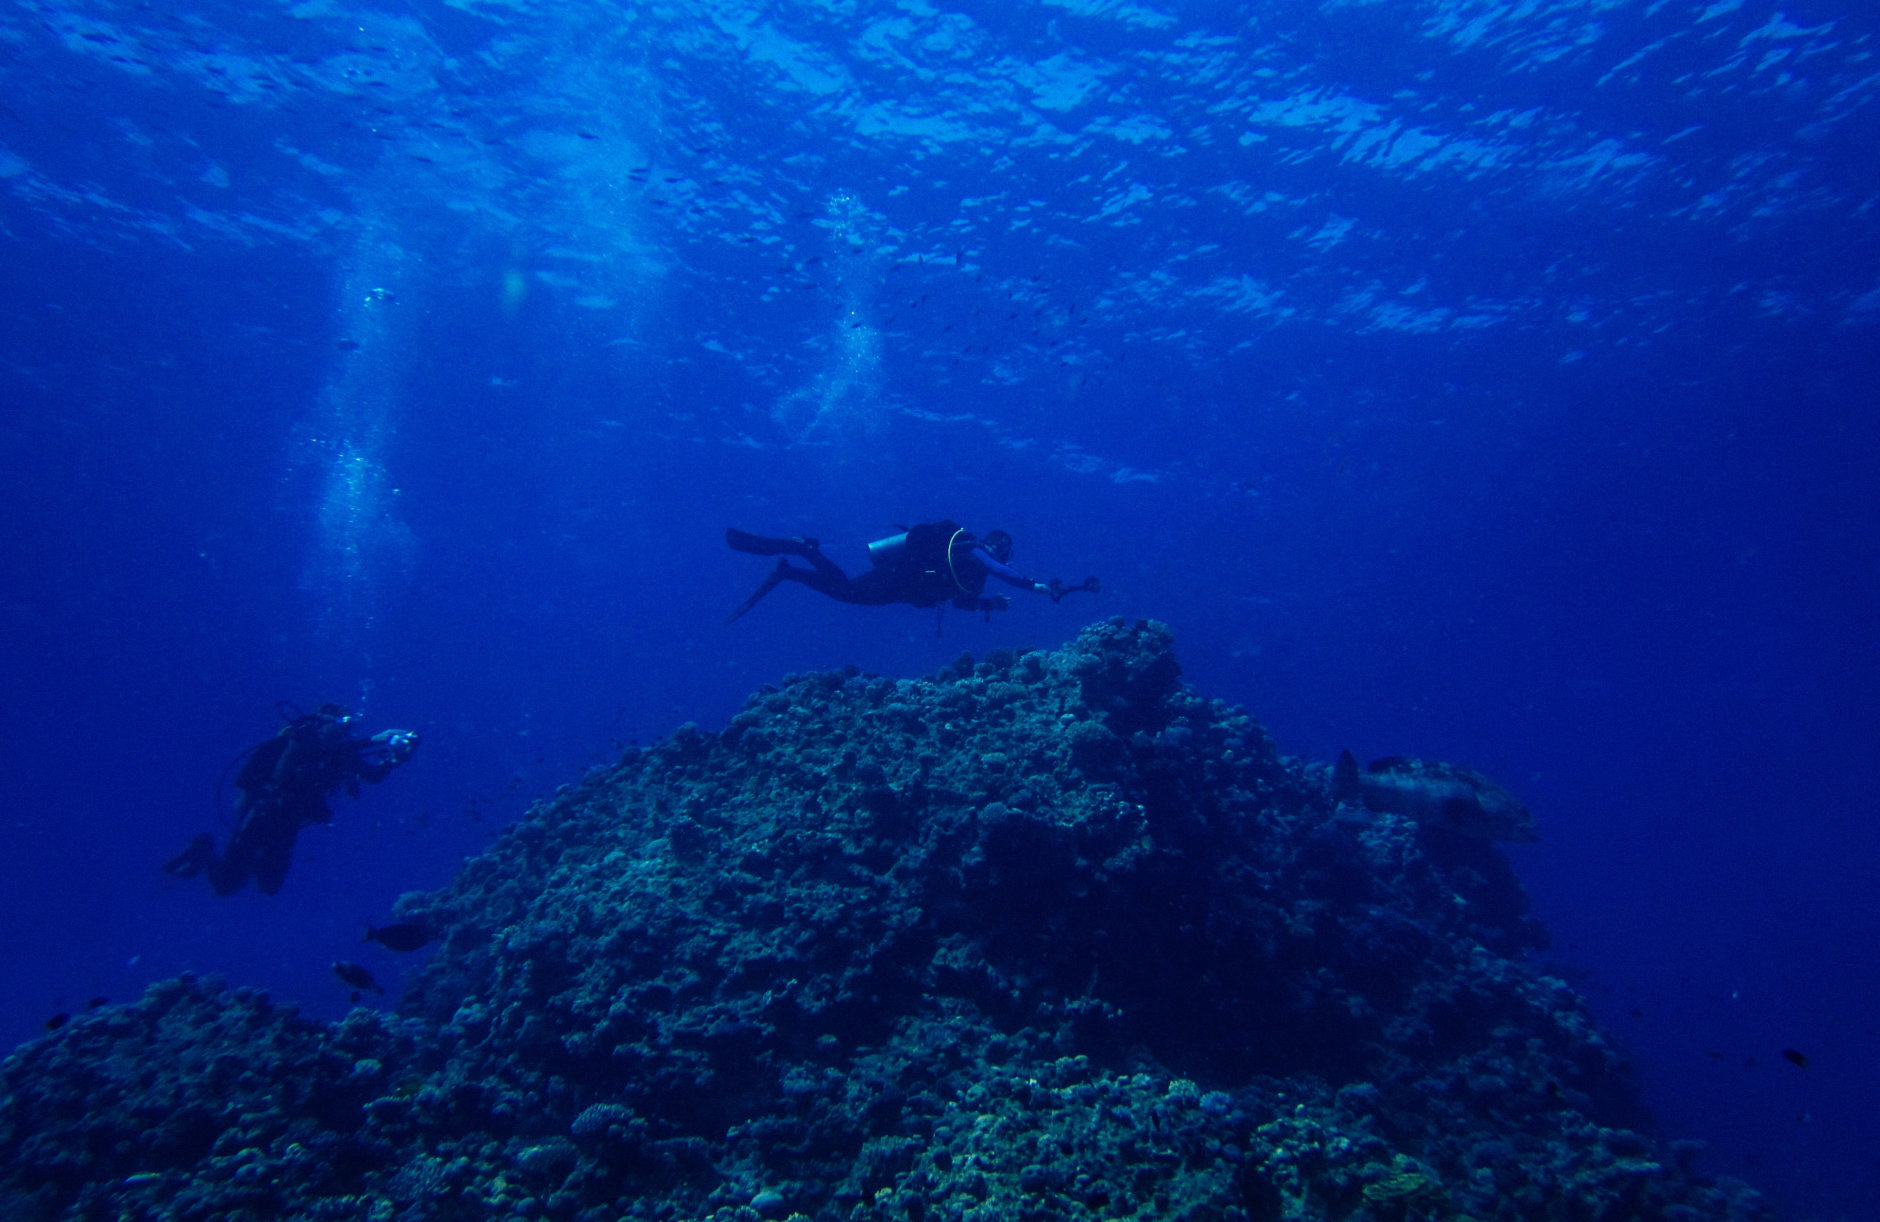 SHARM EL SHEIKH, EGYPT - OCTOBER 27: A pair of SCUBA divers swim over coral during a guided dive on October 27, 2013 in the Red Sea near the resort town of Sharm El Sheikh, Egypt. Sharm el-Sheikh, lying on the Red Sea coast in Egypt's South Sinai governorate, is one of Egypt's most popular destinations for tourists. Egypt's tourist industry has struggled since a popular uprising overthrew President Hosni Mubarak in early 2011, and tourist numbers have taken a further dive since the Egyptian Military's overthrow of the country's first democratically elected President, Mohammed Morsi in July 2013. Sharm el-Sheikh, popular for its beachfront resorts and water sports including SCUBA diving, has faired better than some other tourist spots in Egypt, with major hotels reporting roughly 20% occupancy during the resort's busy summer season. (Photo by Ed Giles/Getty Images).